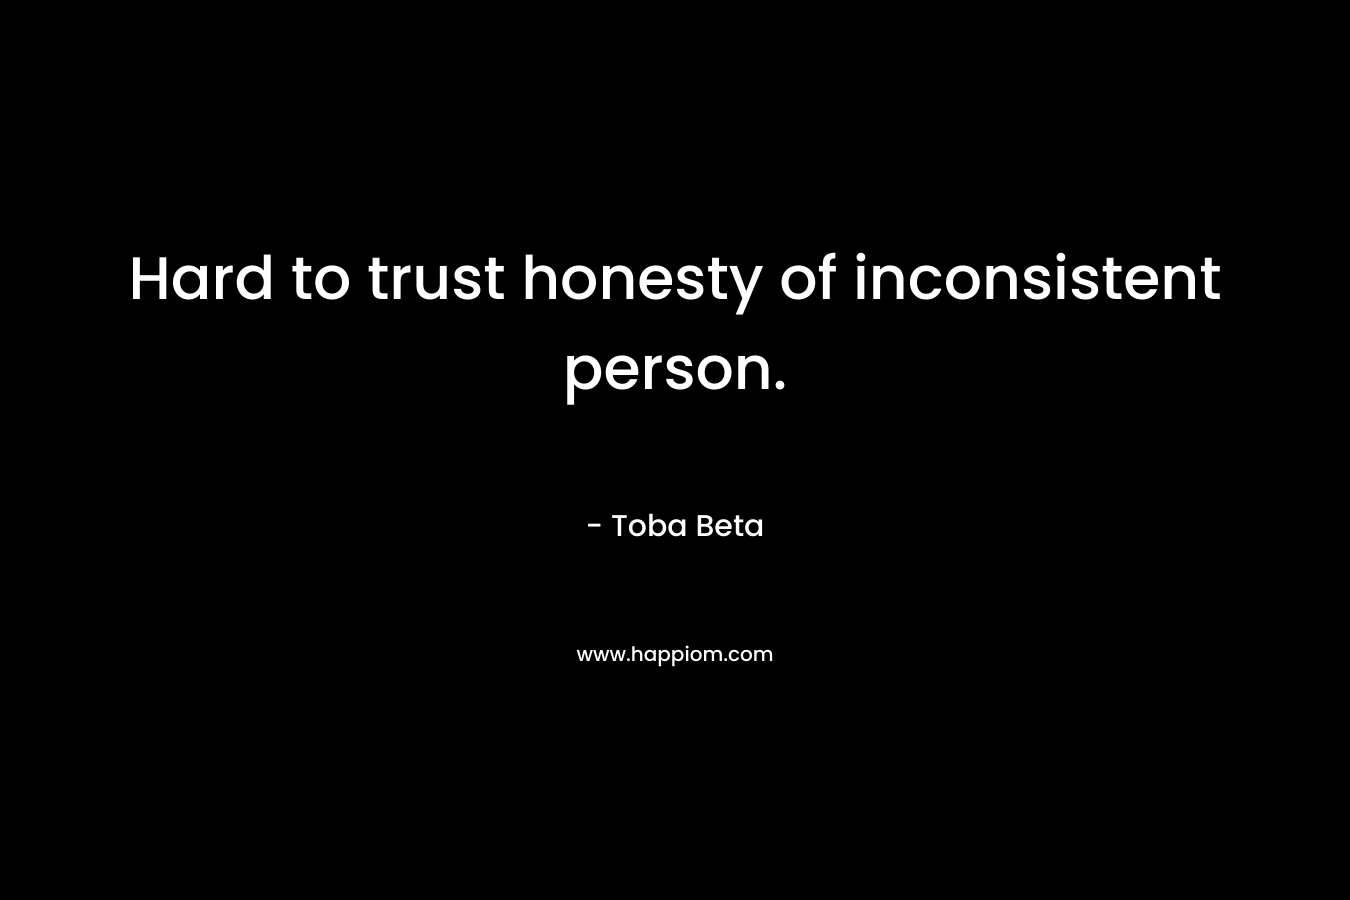 Hard to trust honesty of inconsistent person. – Toba Beta